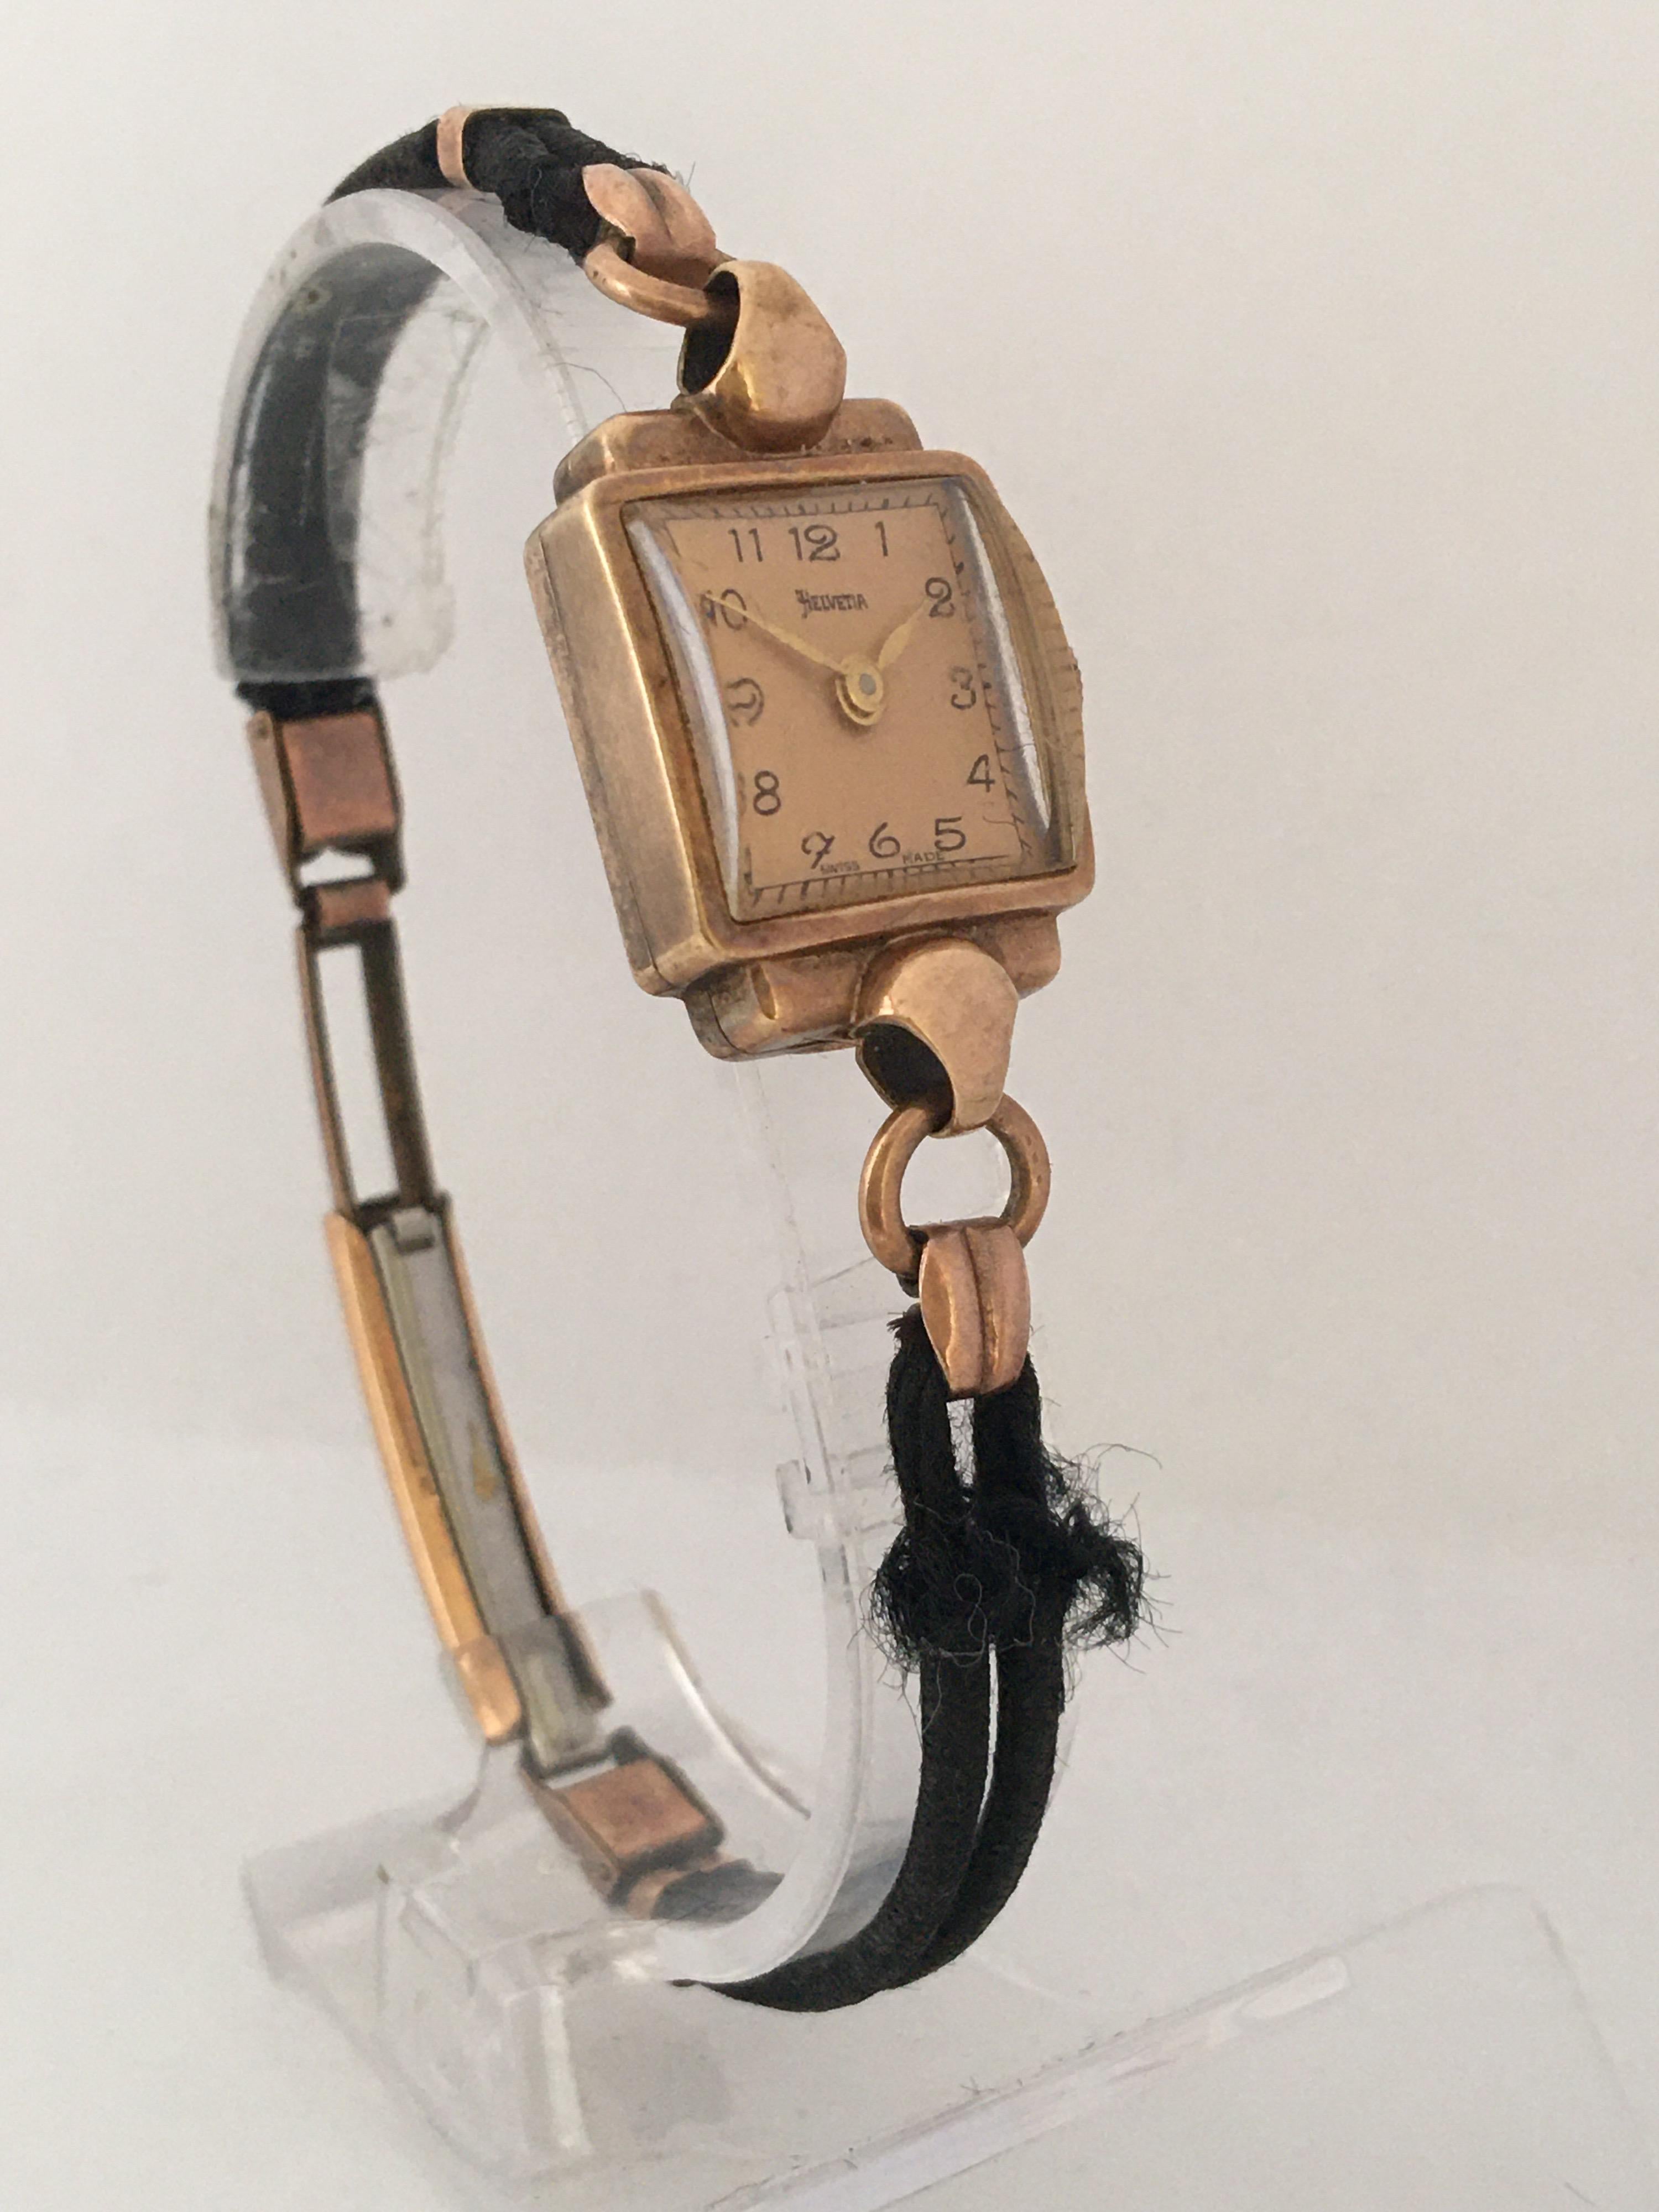 This beautiful pre-owned vintage gold hand winding watch is working and it is ticking well but I cannot guarantee the time accuracy. visible signs of ageing and wear. The strap is a bit worn as shown. Please study the images carefully as part of the